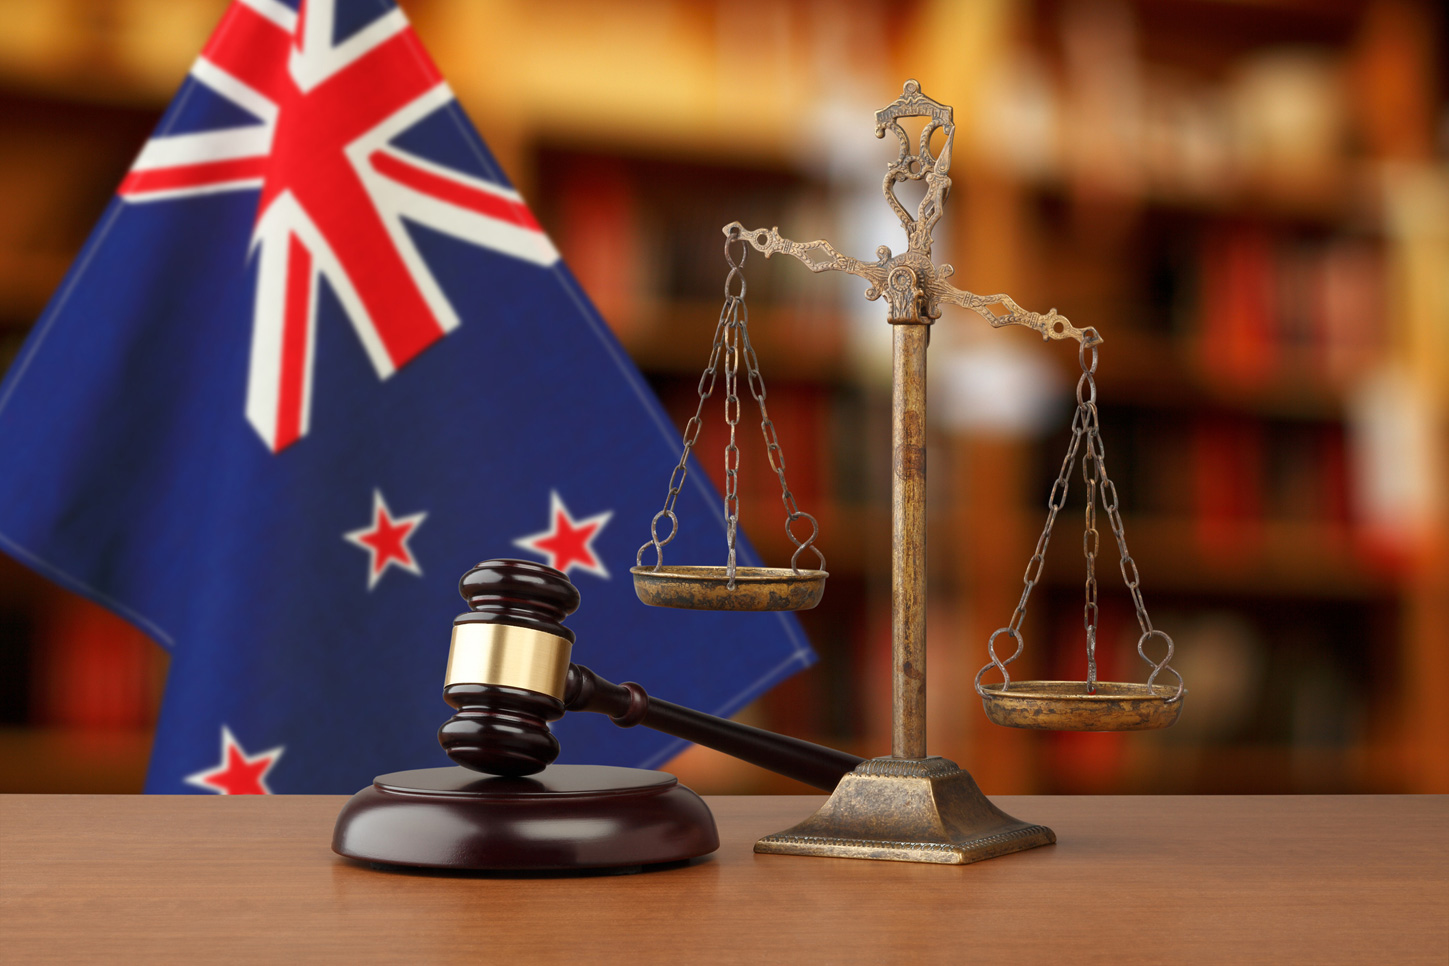 NZ flag, gavel and scales